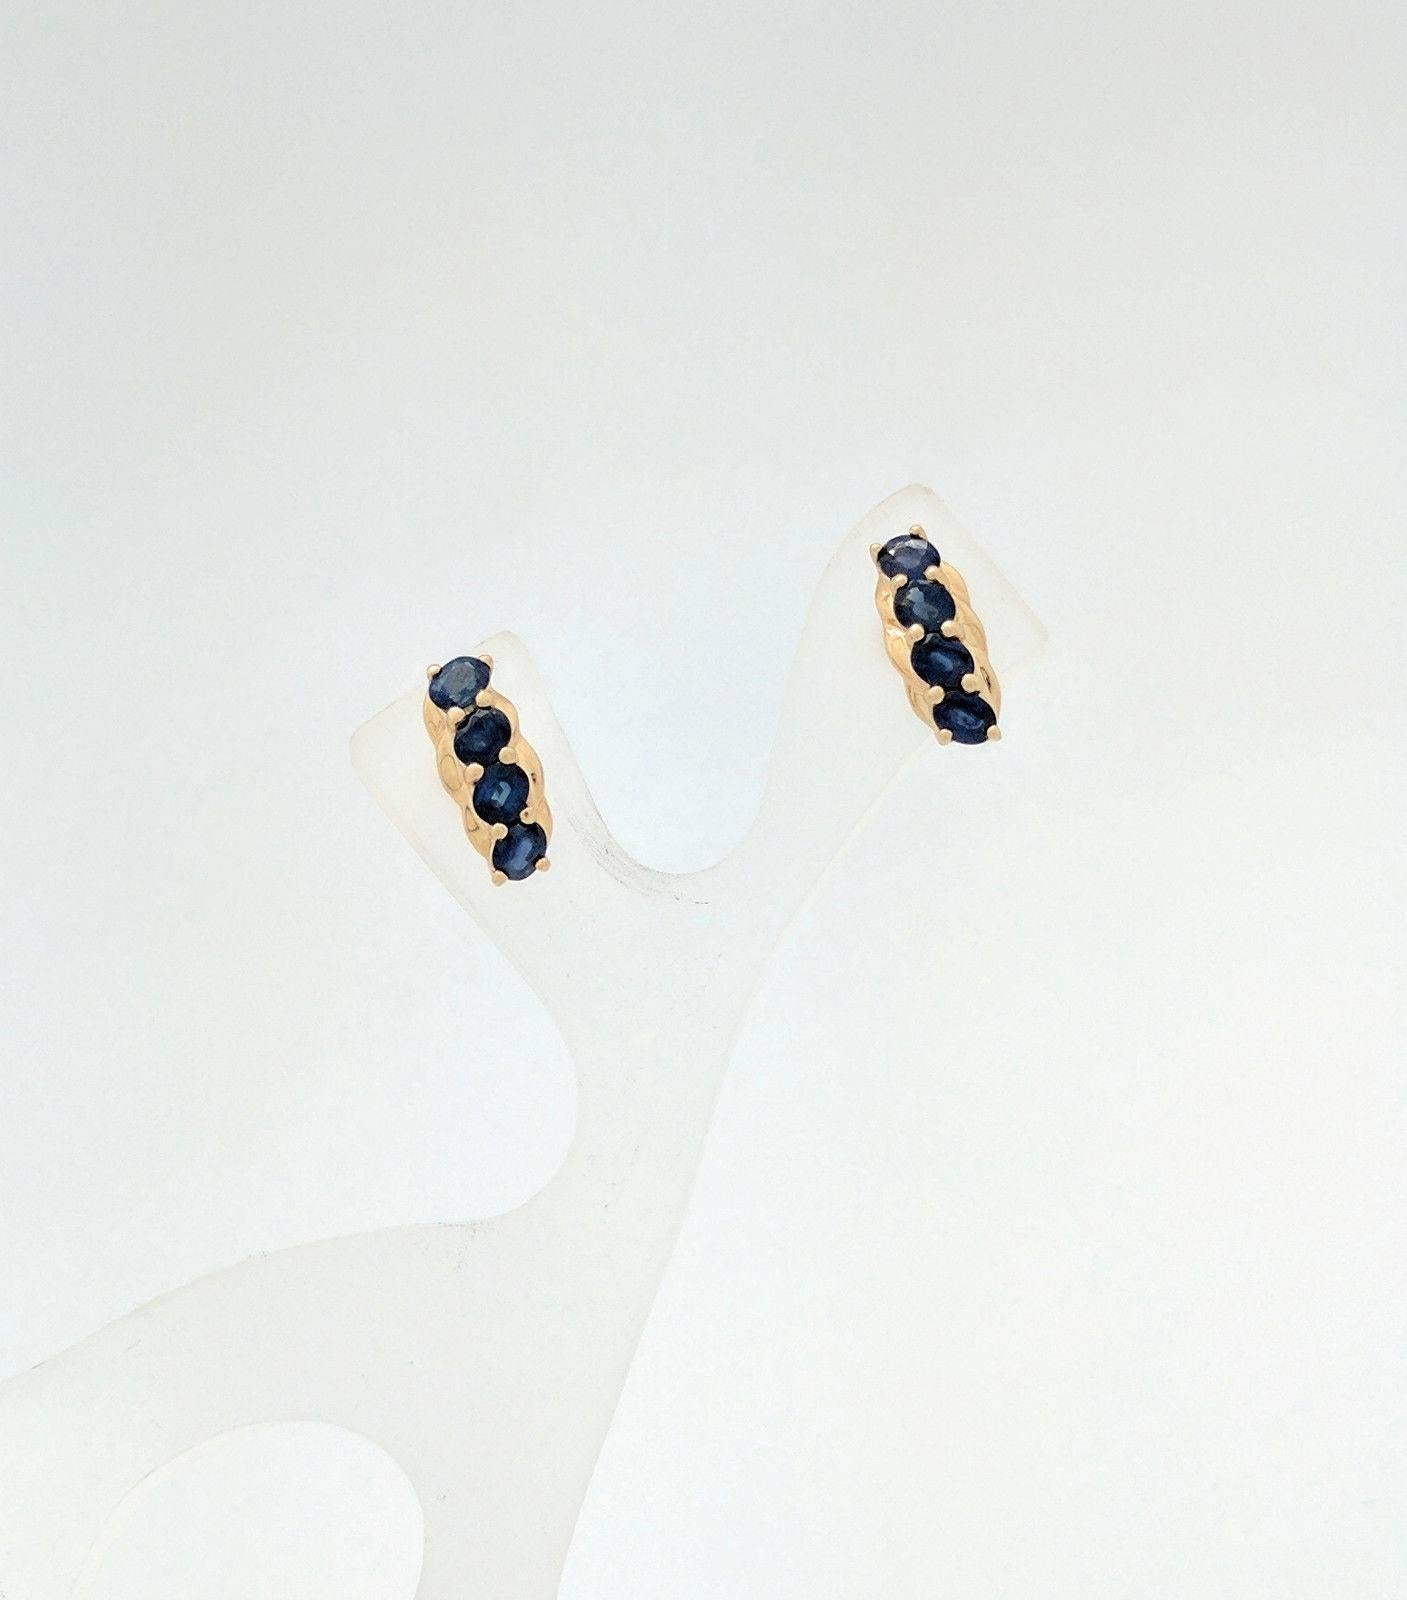 Ladies 14K Yellow Gold Sapphire Earrings 2.6 Grams 2ctw

You are viewing a beautiful pair of ladies sapphire earrings. These earrings are crafted from 14k yellow gold and weigh 2.7 grams. They measures 14mm in length and 6mm in width. Each earring